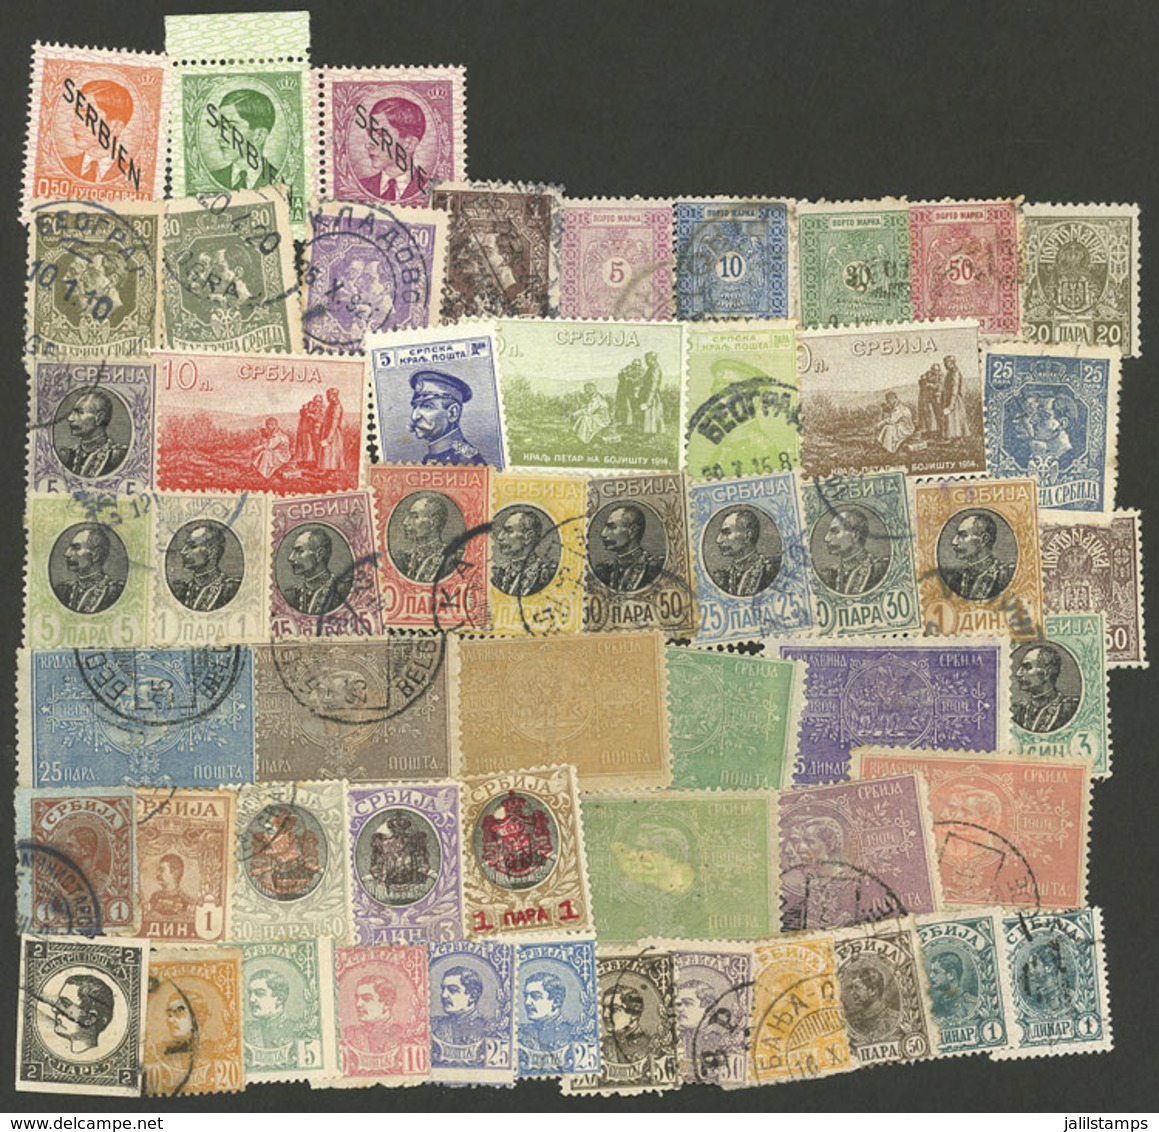 SERBIA: Group Of Used Or Mint Stamps, A Few Can Have Minor Defects, Most Of Fine Quality, Low Start! - Serbien